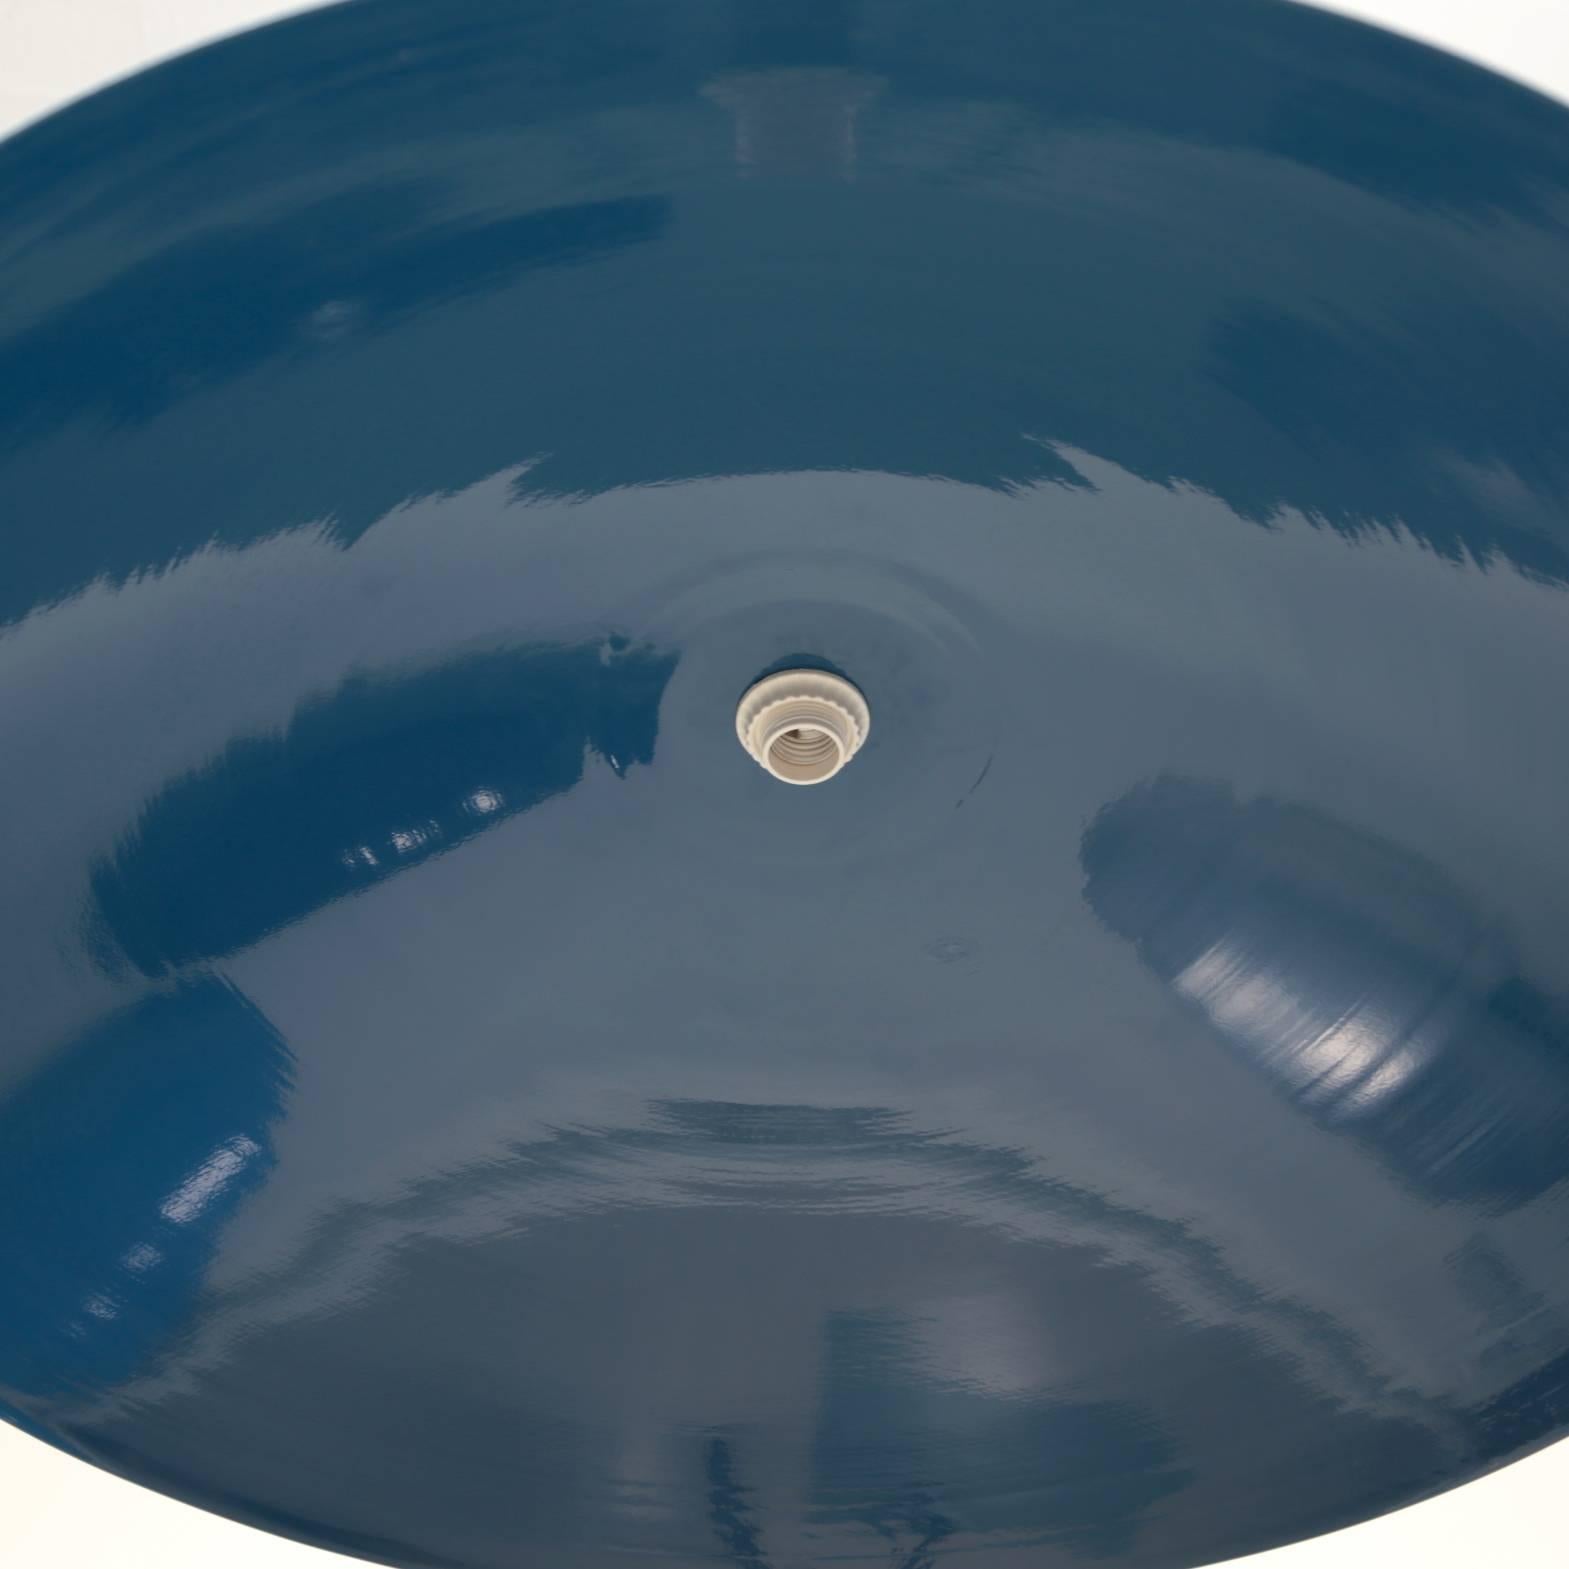 This listing is for 1x Industry Pendant in Sea Blue by RESEARCH Lighting. We can customize the color to almost any RAL color.

Materials: Aluminum
Finish: Exterior & interior is powder coated in sea blue
Electronics: 1x E26 Socket, G40 Bulb